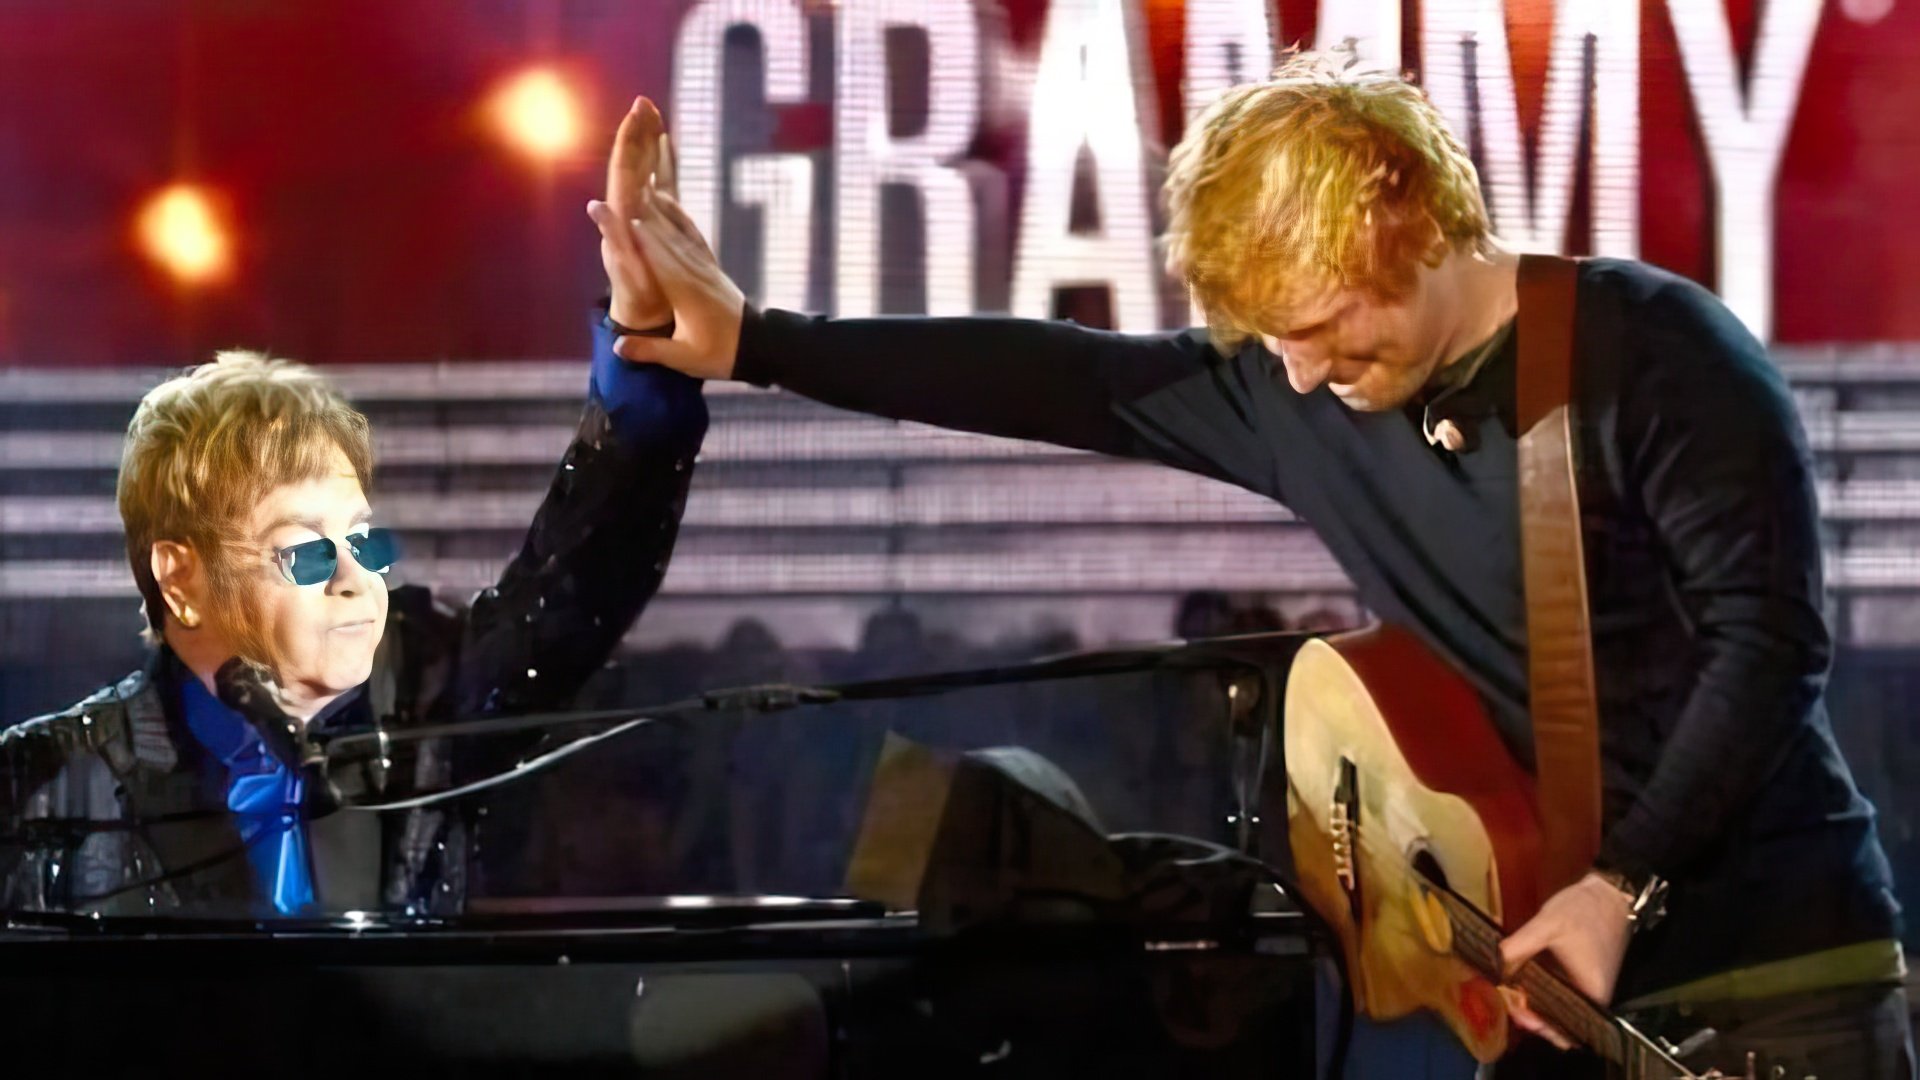 Pictured: Ed Sheeran and Elton John at the Grammy Ceremony